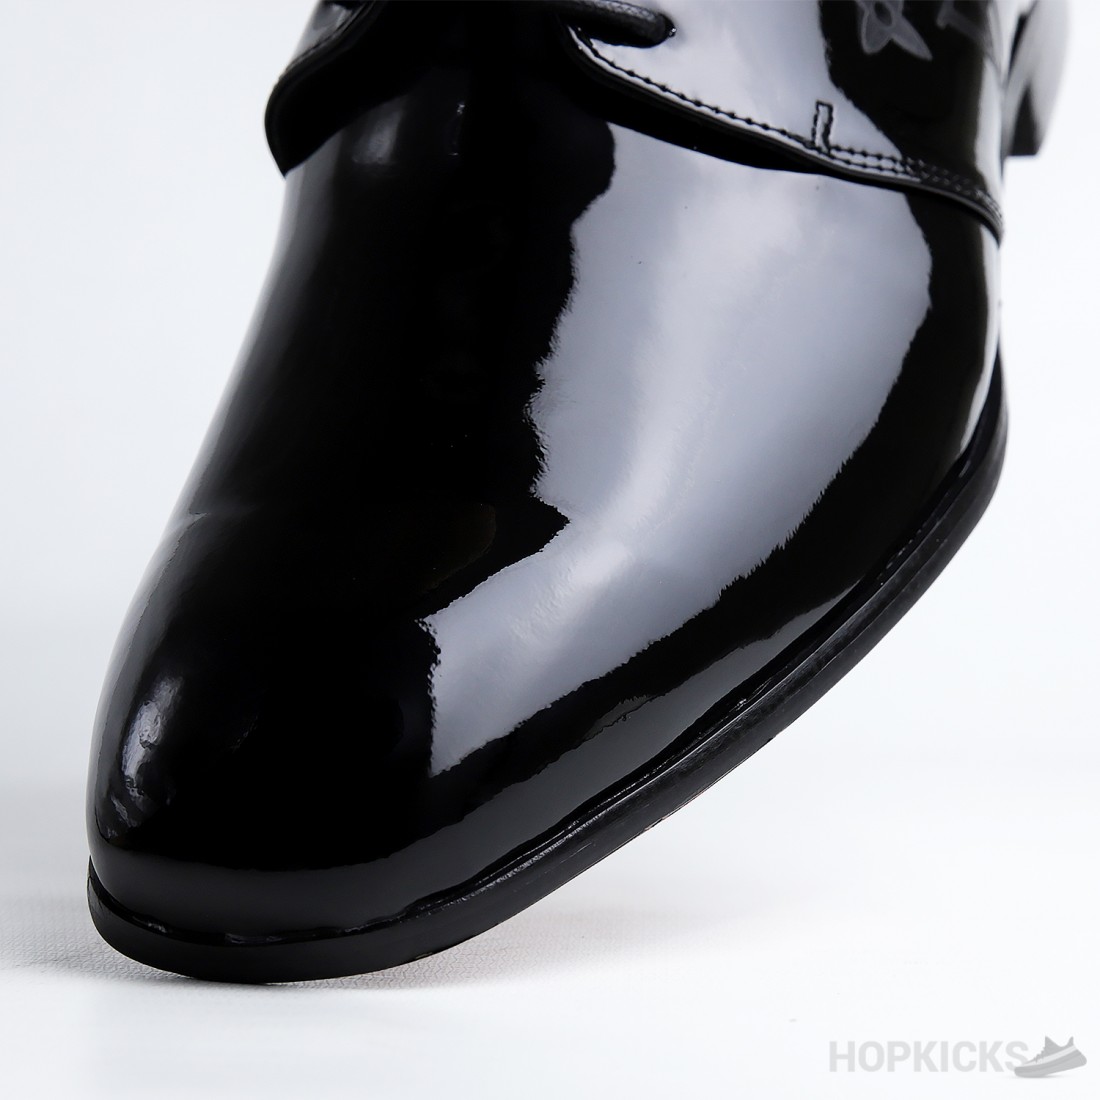 Grenelle Richelieu in Men's Shoes collections by Louis Vuitton